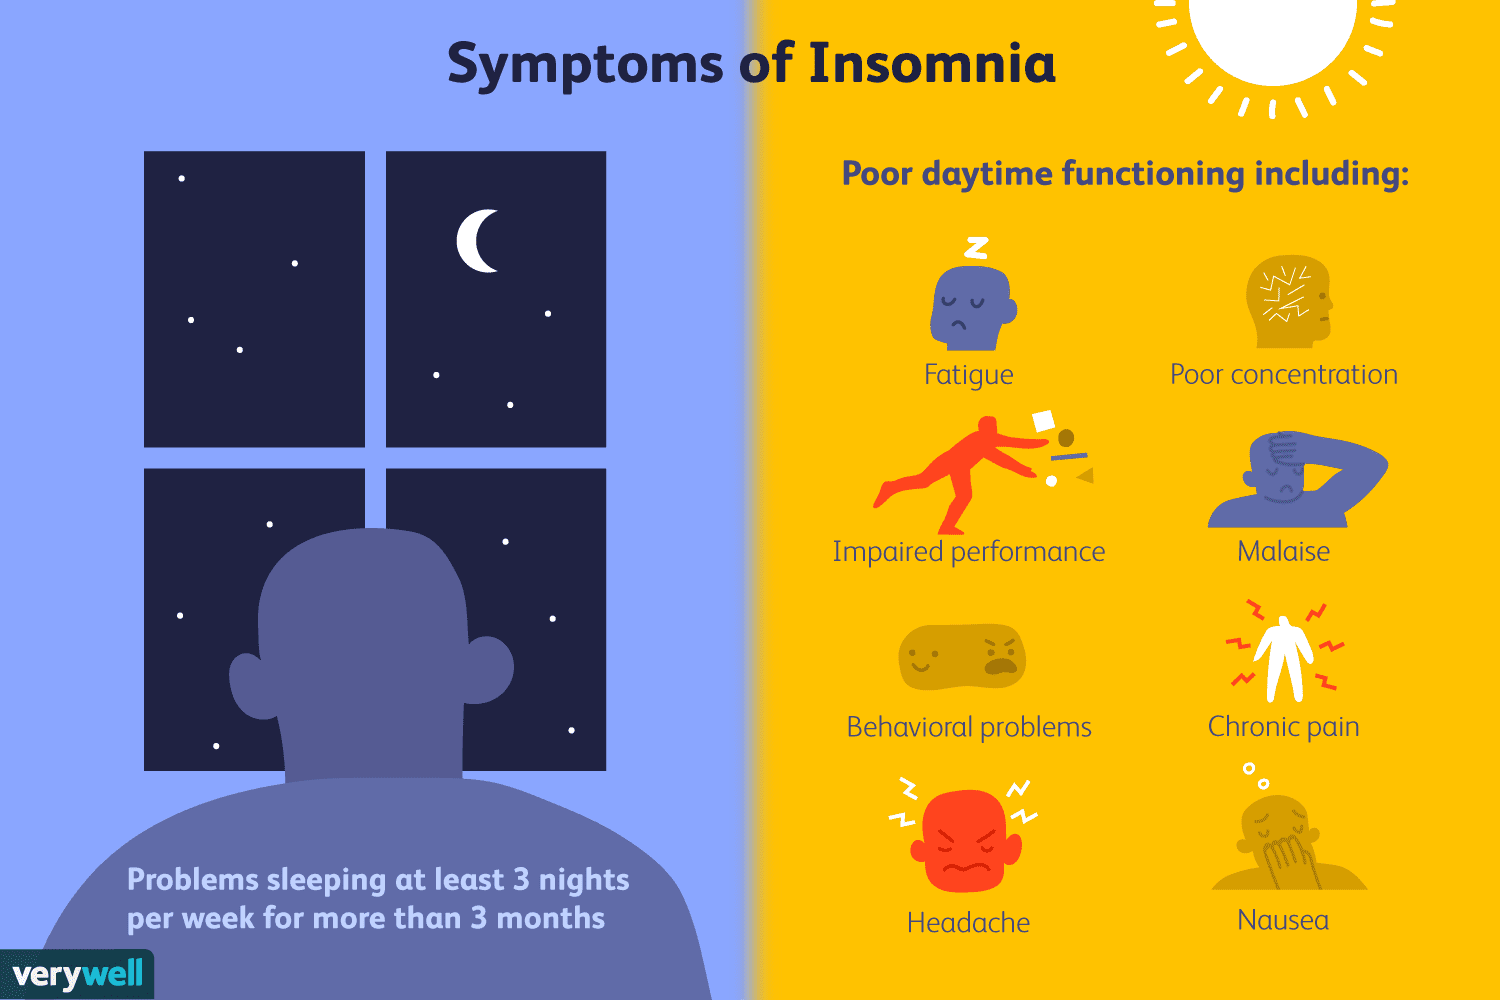 What are the common symptoms of insomnia?